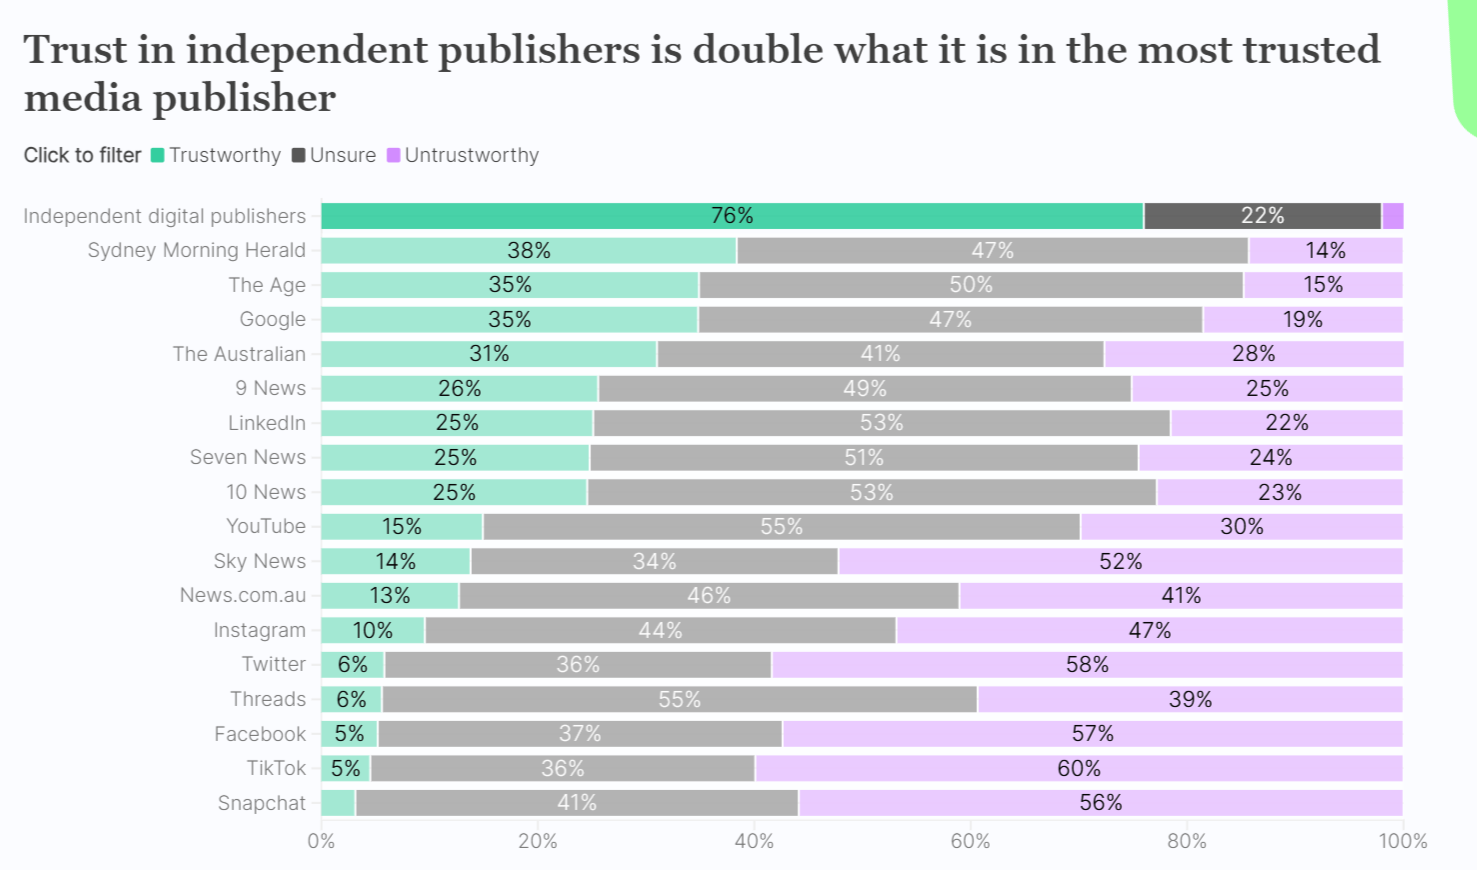 Trust in independent publishers is double what it is in the most trusted media publisher